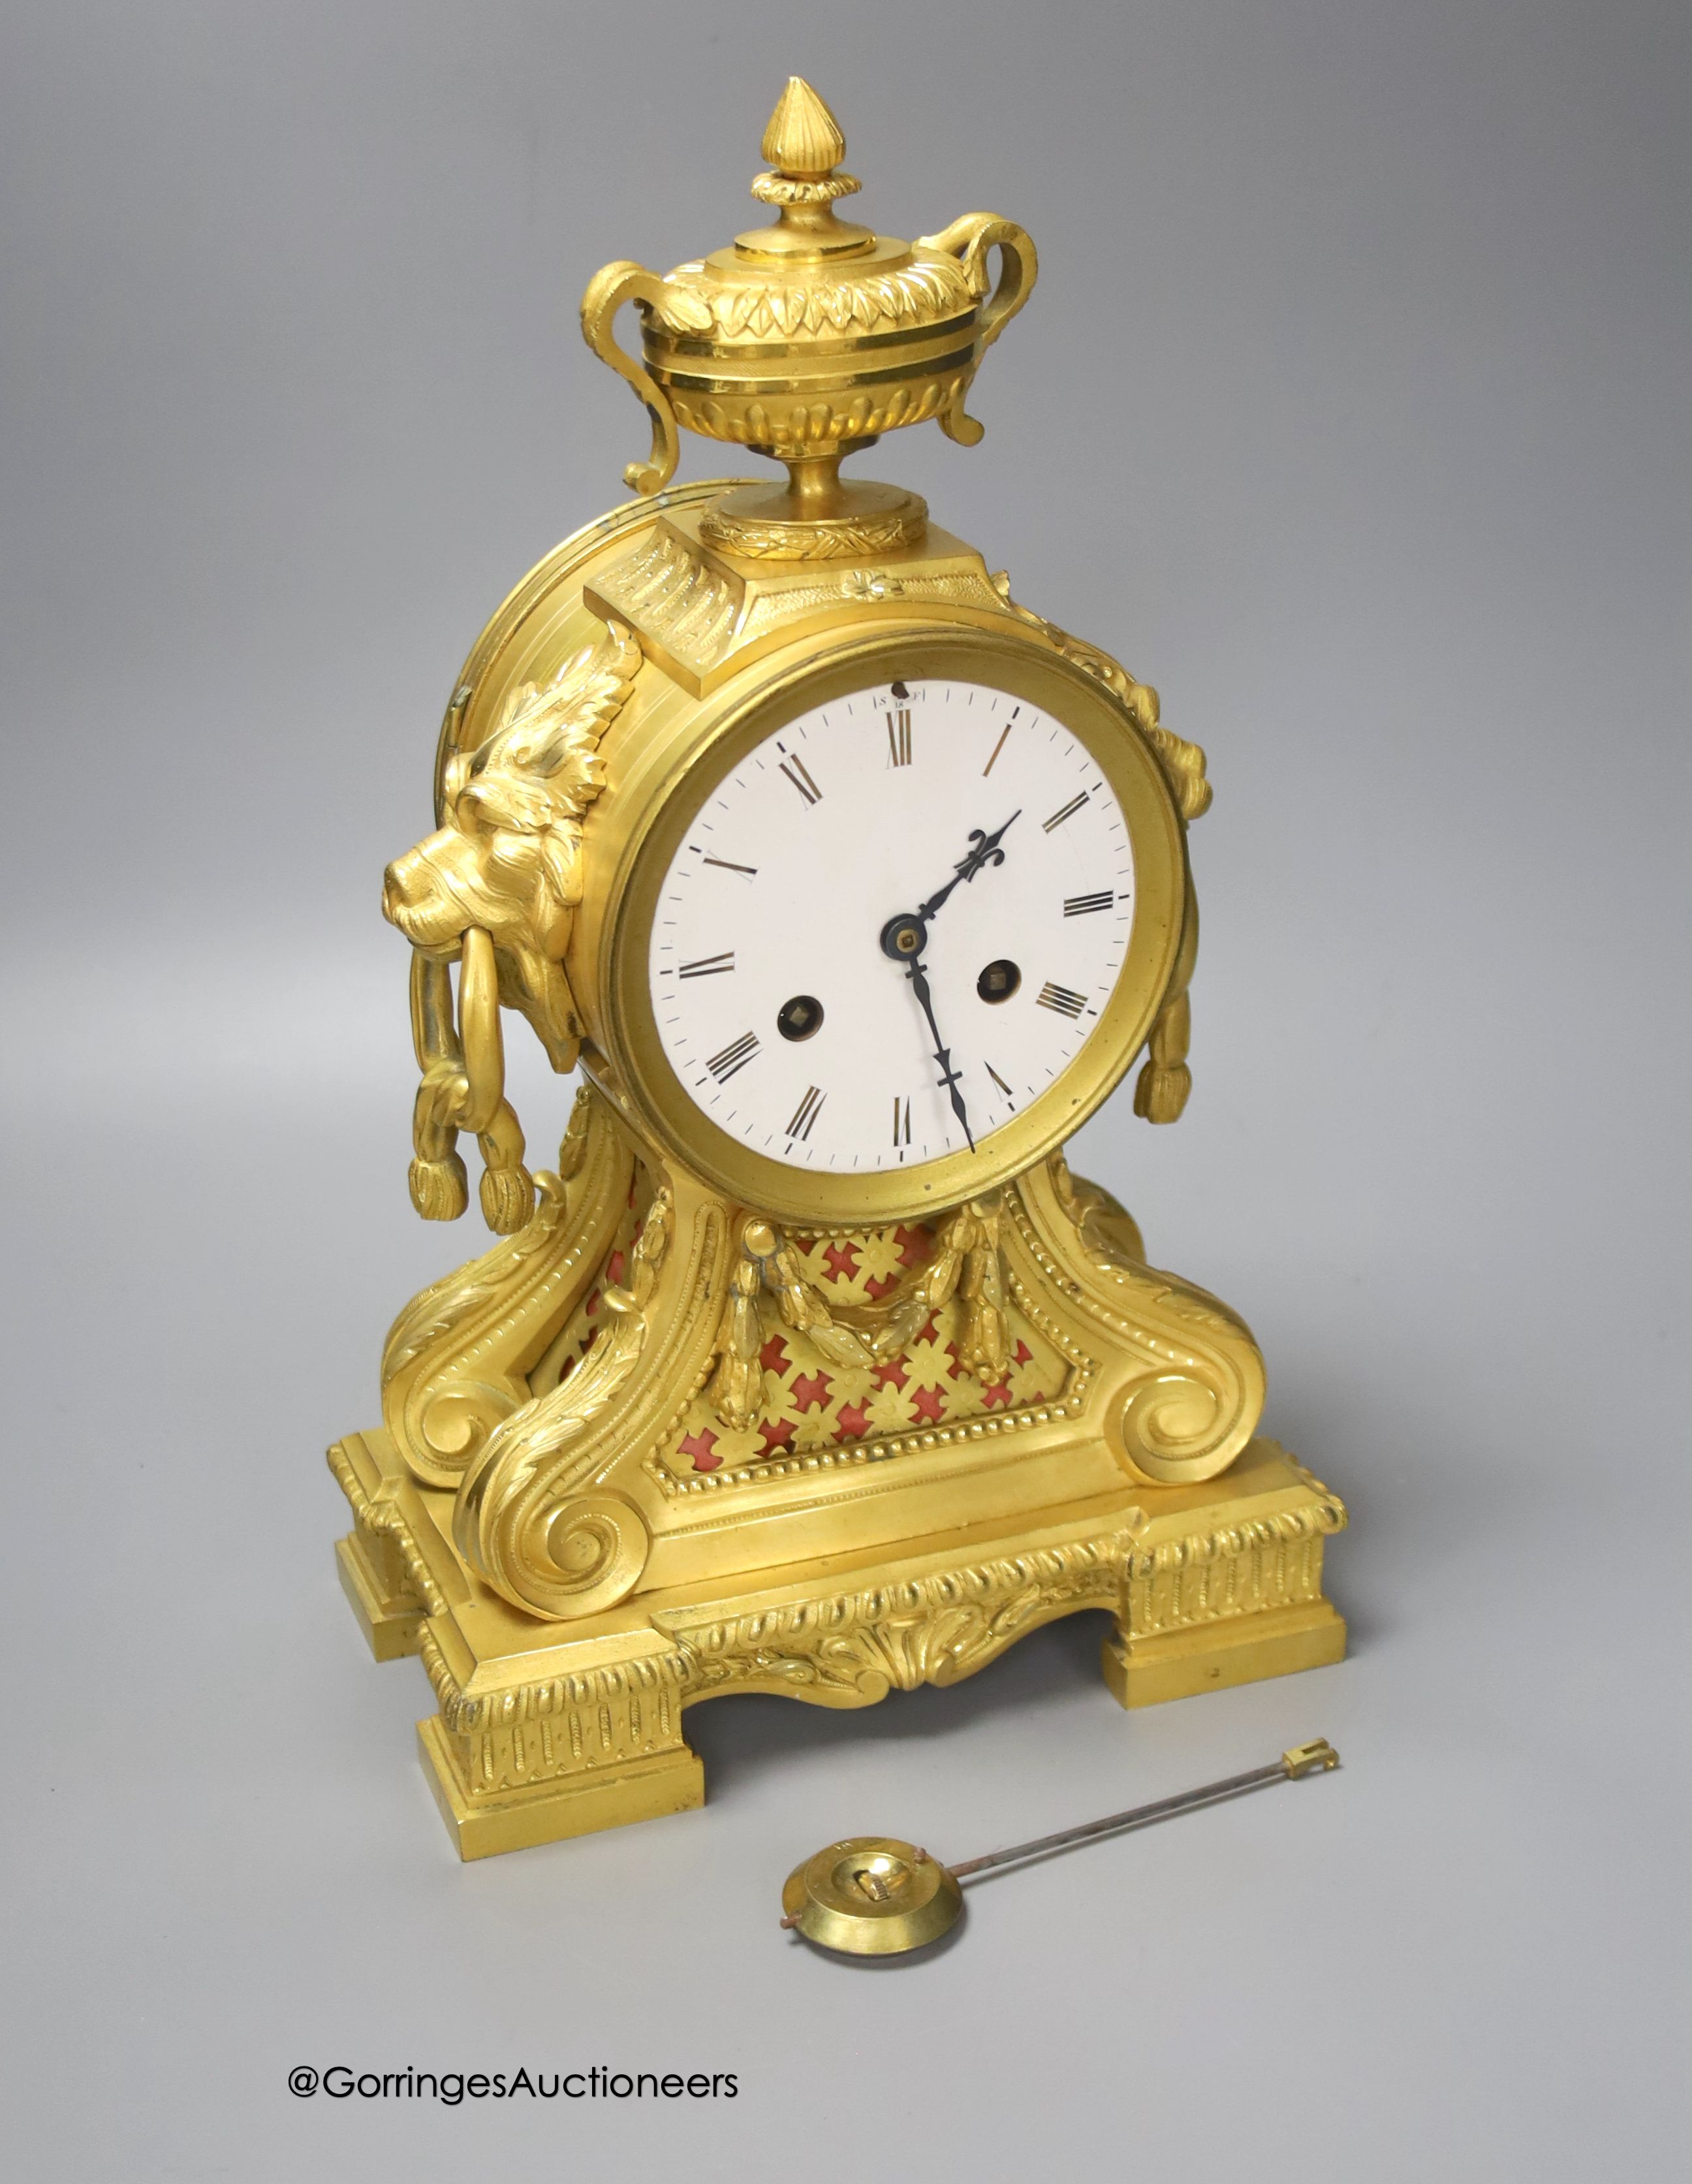 A 19th century French ormolu clock, with lion mask ring handles, 34cm